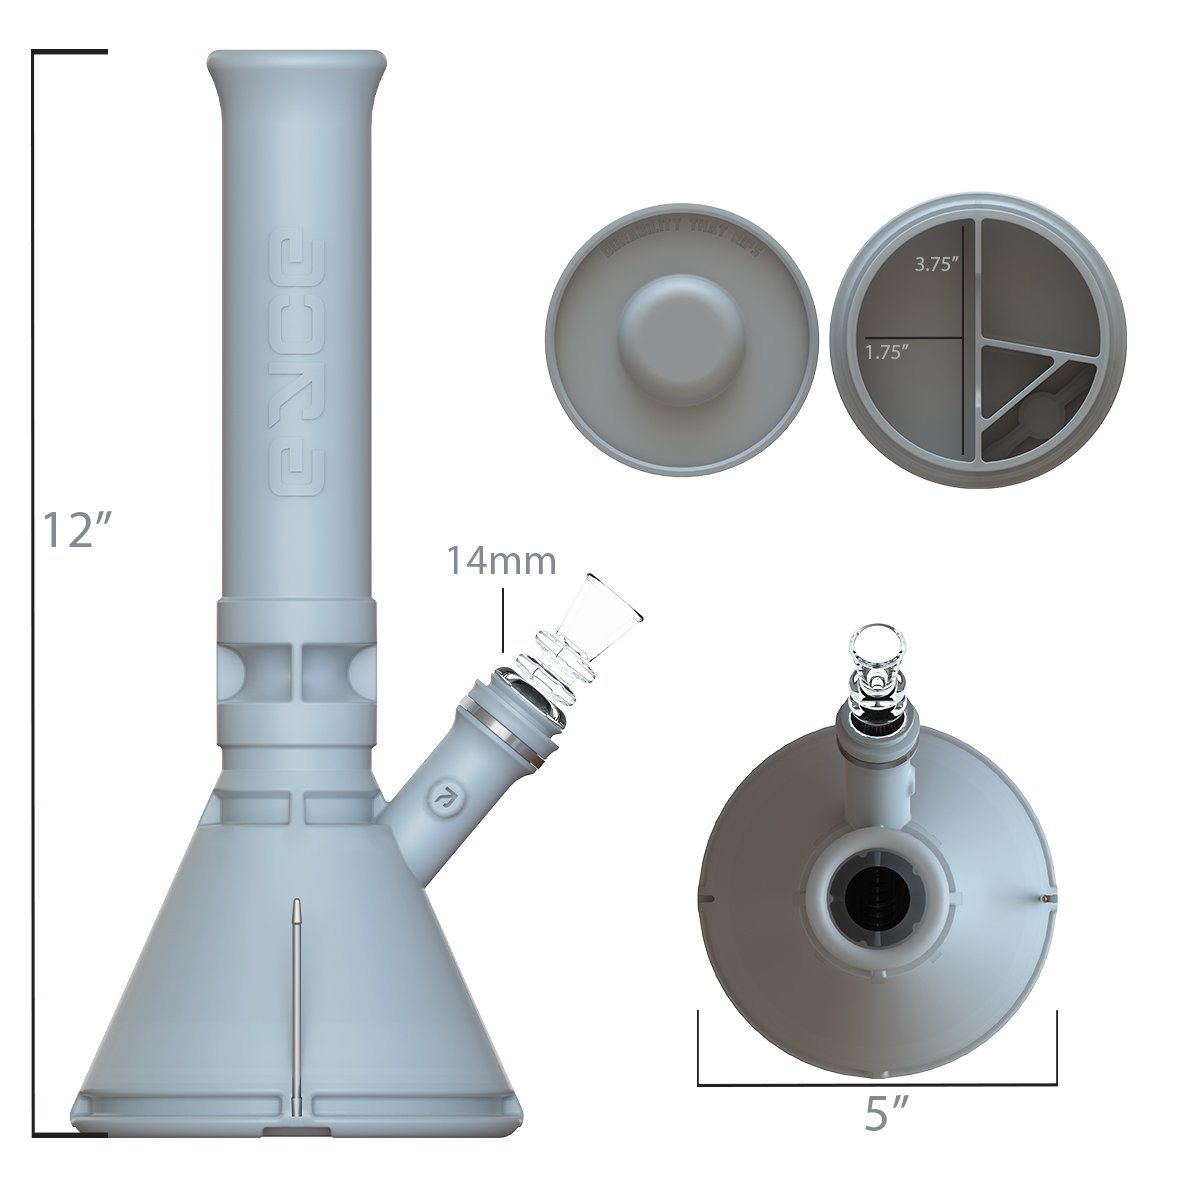 Eyce Beaker Silicone Bong with Collapsible Design and Accessories View